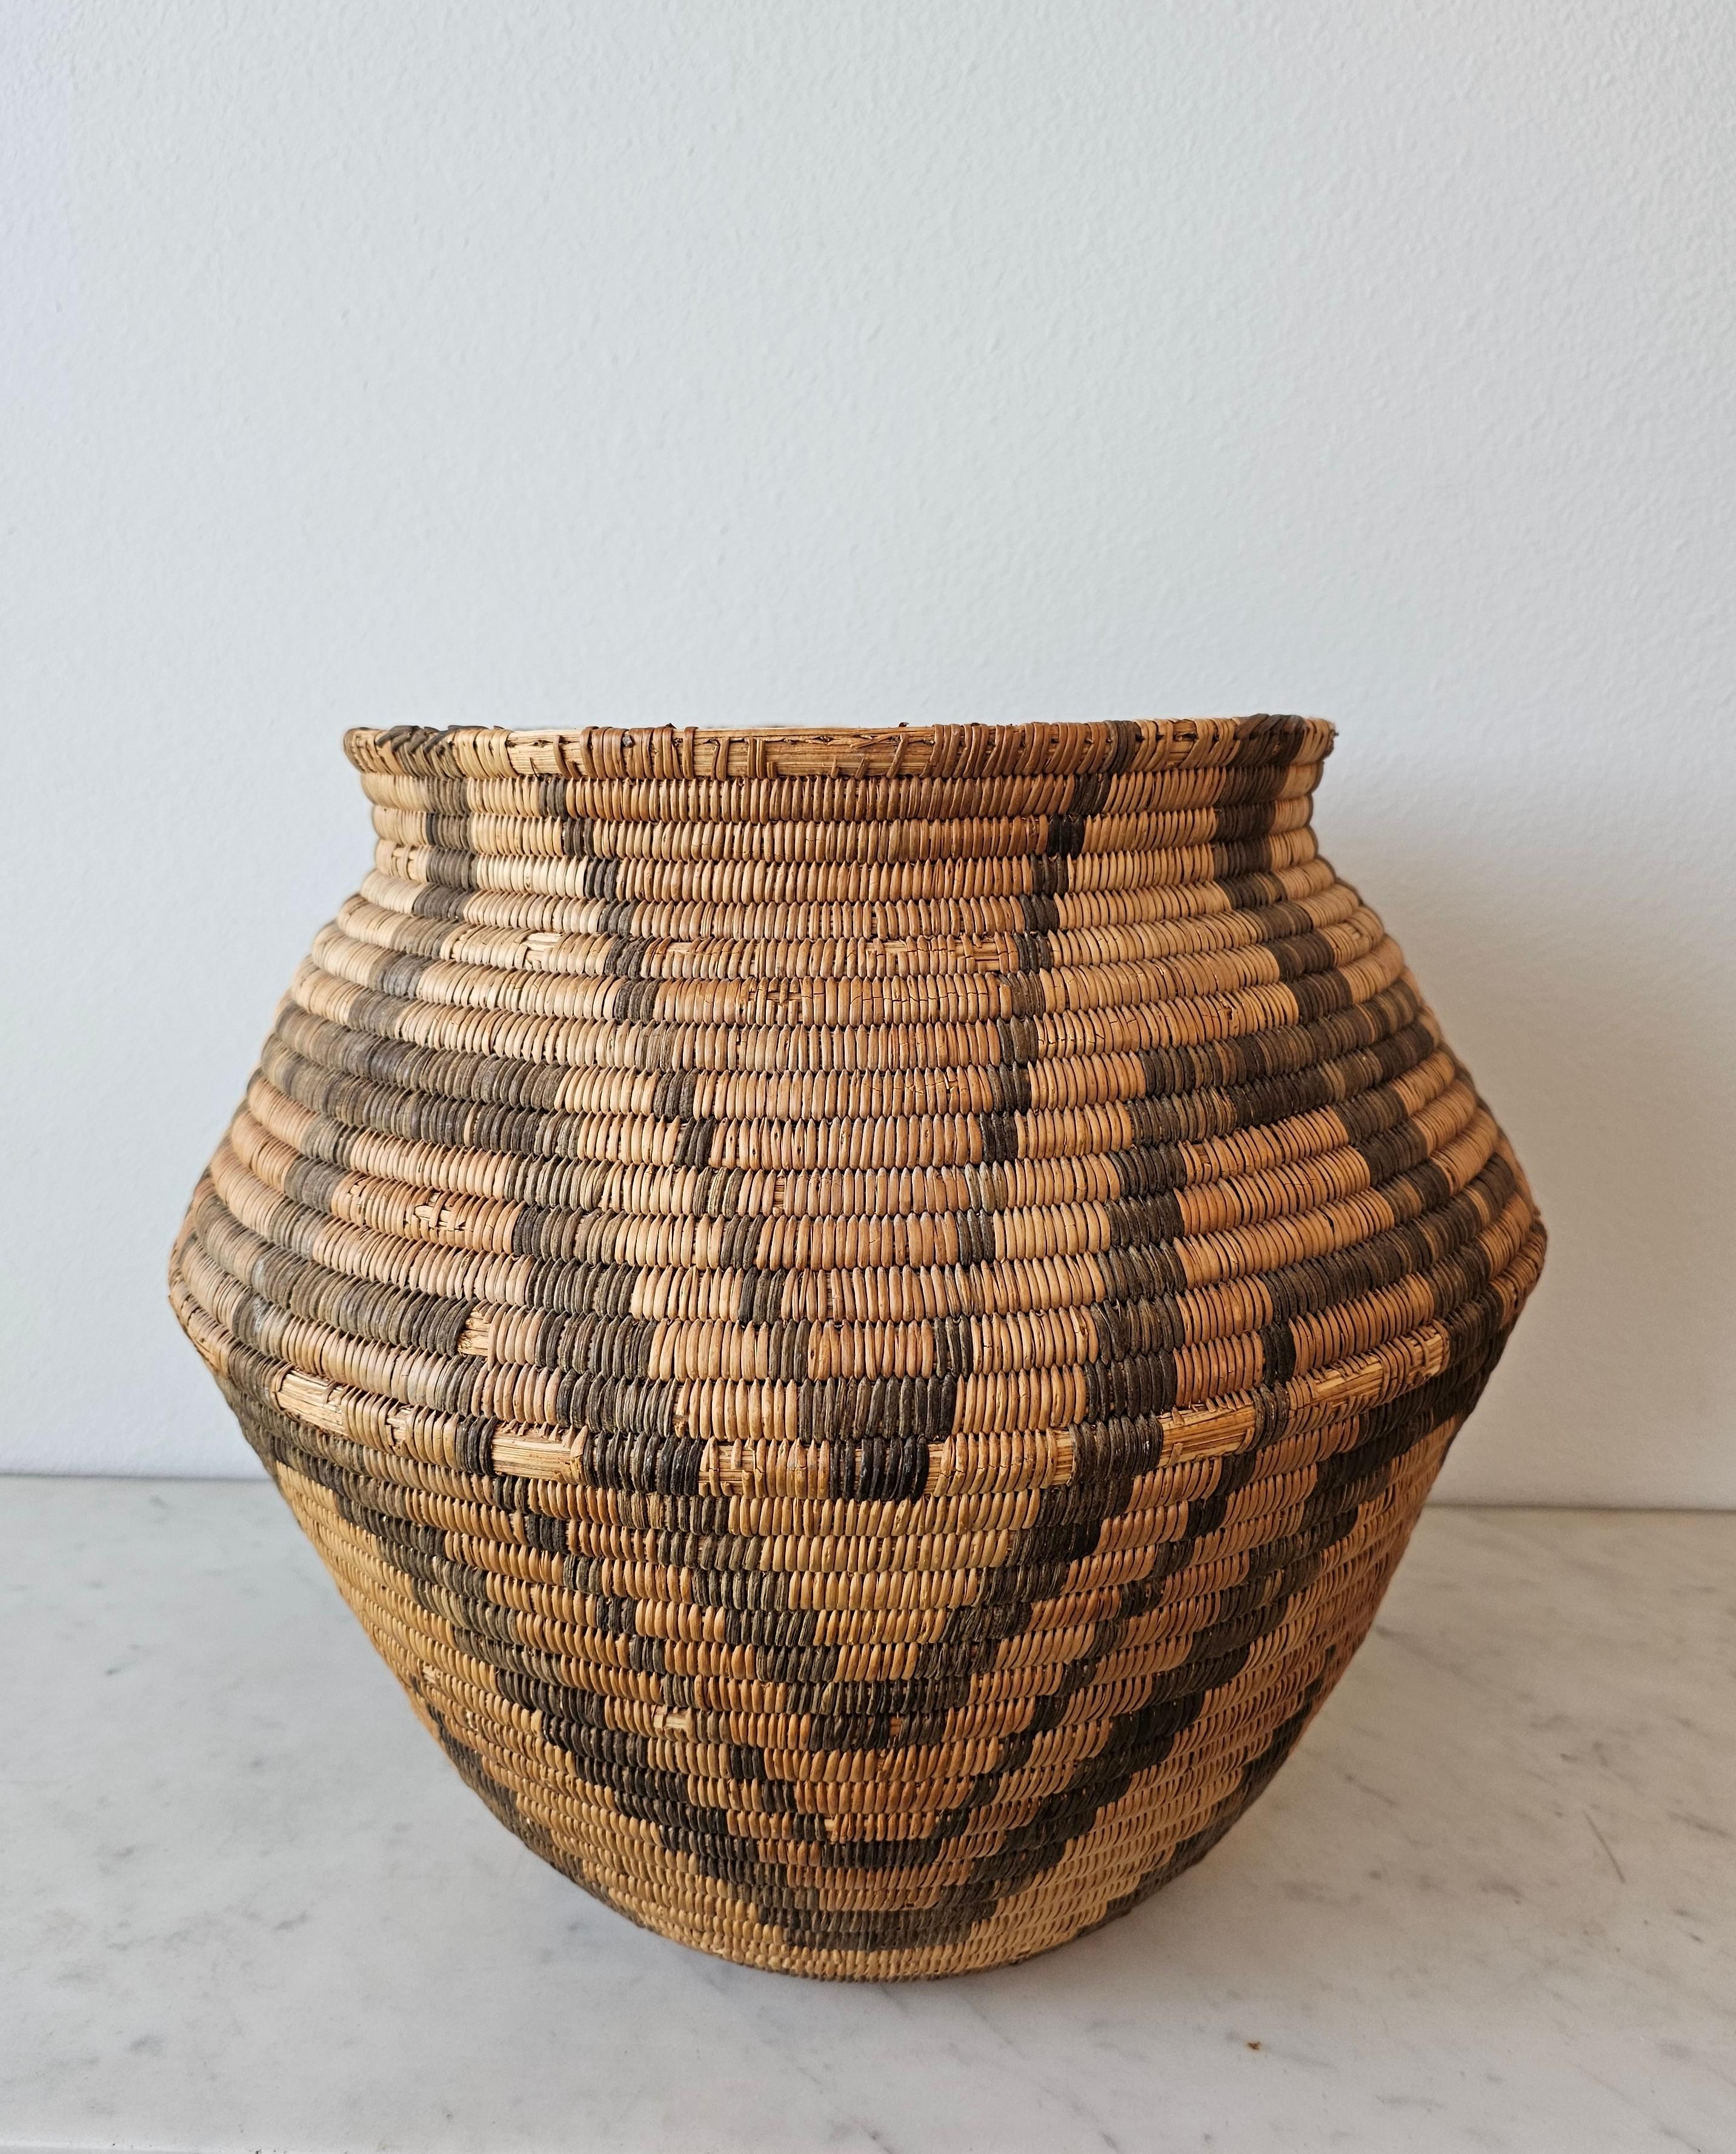 A magnificent Apache Native American coiled olla jar shaped basket, willow, devil's claw. Early 20th century, Southwestern United States, most impressive large size, primitive hand-woven willow and devil's claw natural fiber construction,